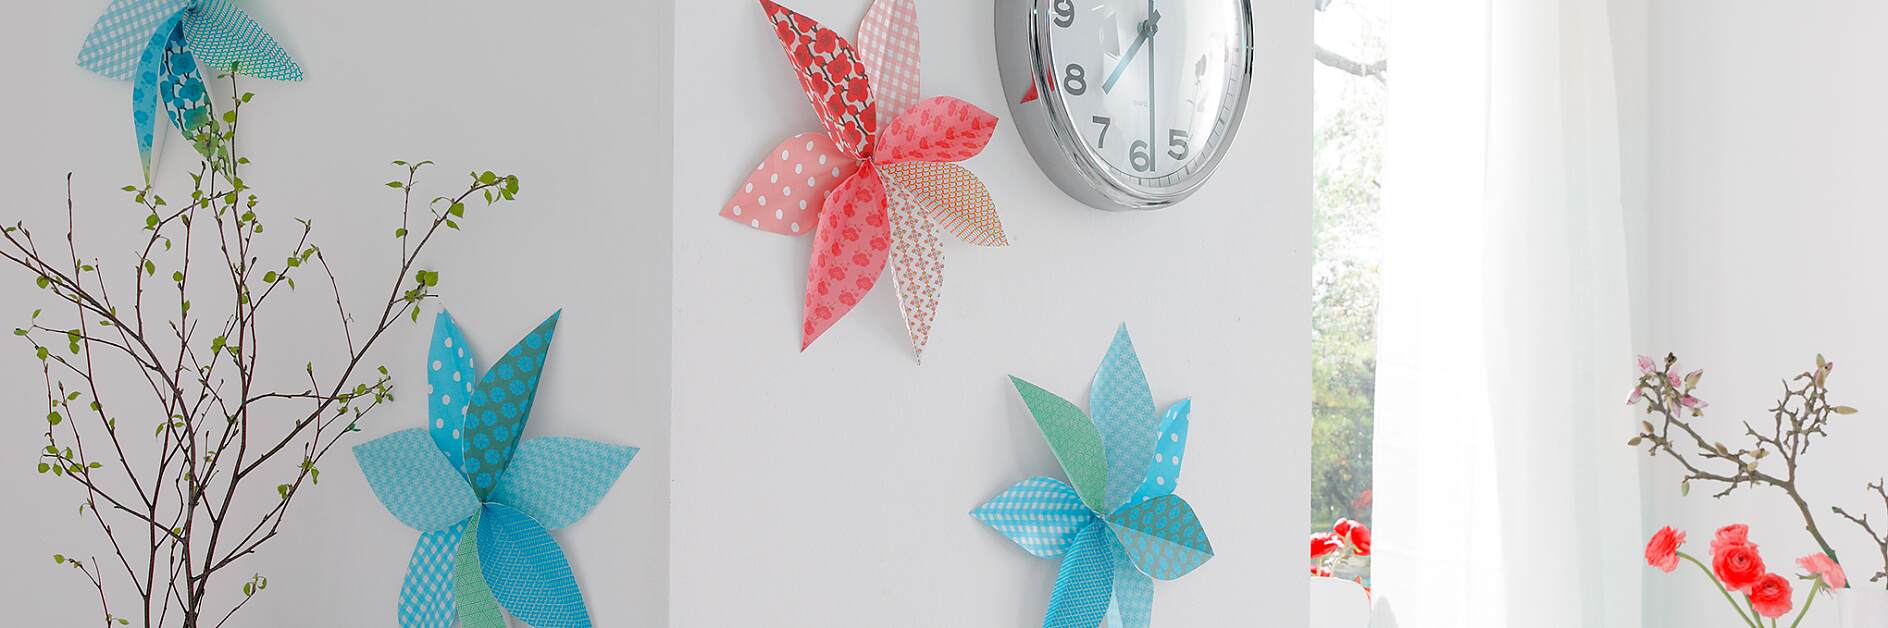 Flowers that Bloom on the Wall Decoration Idea